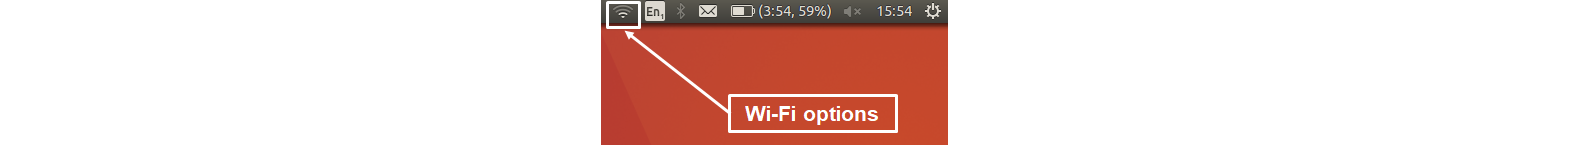 Wi-Fi options for Linux 3.0 white border